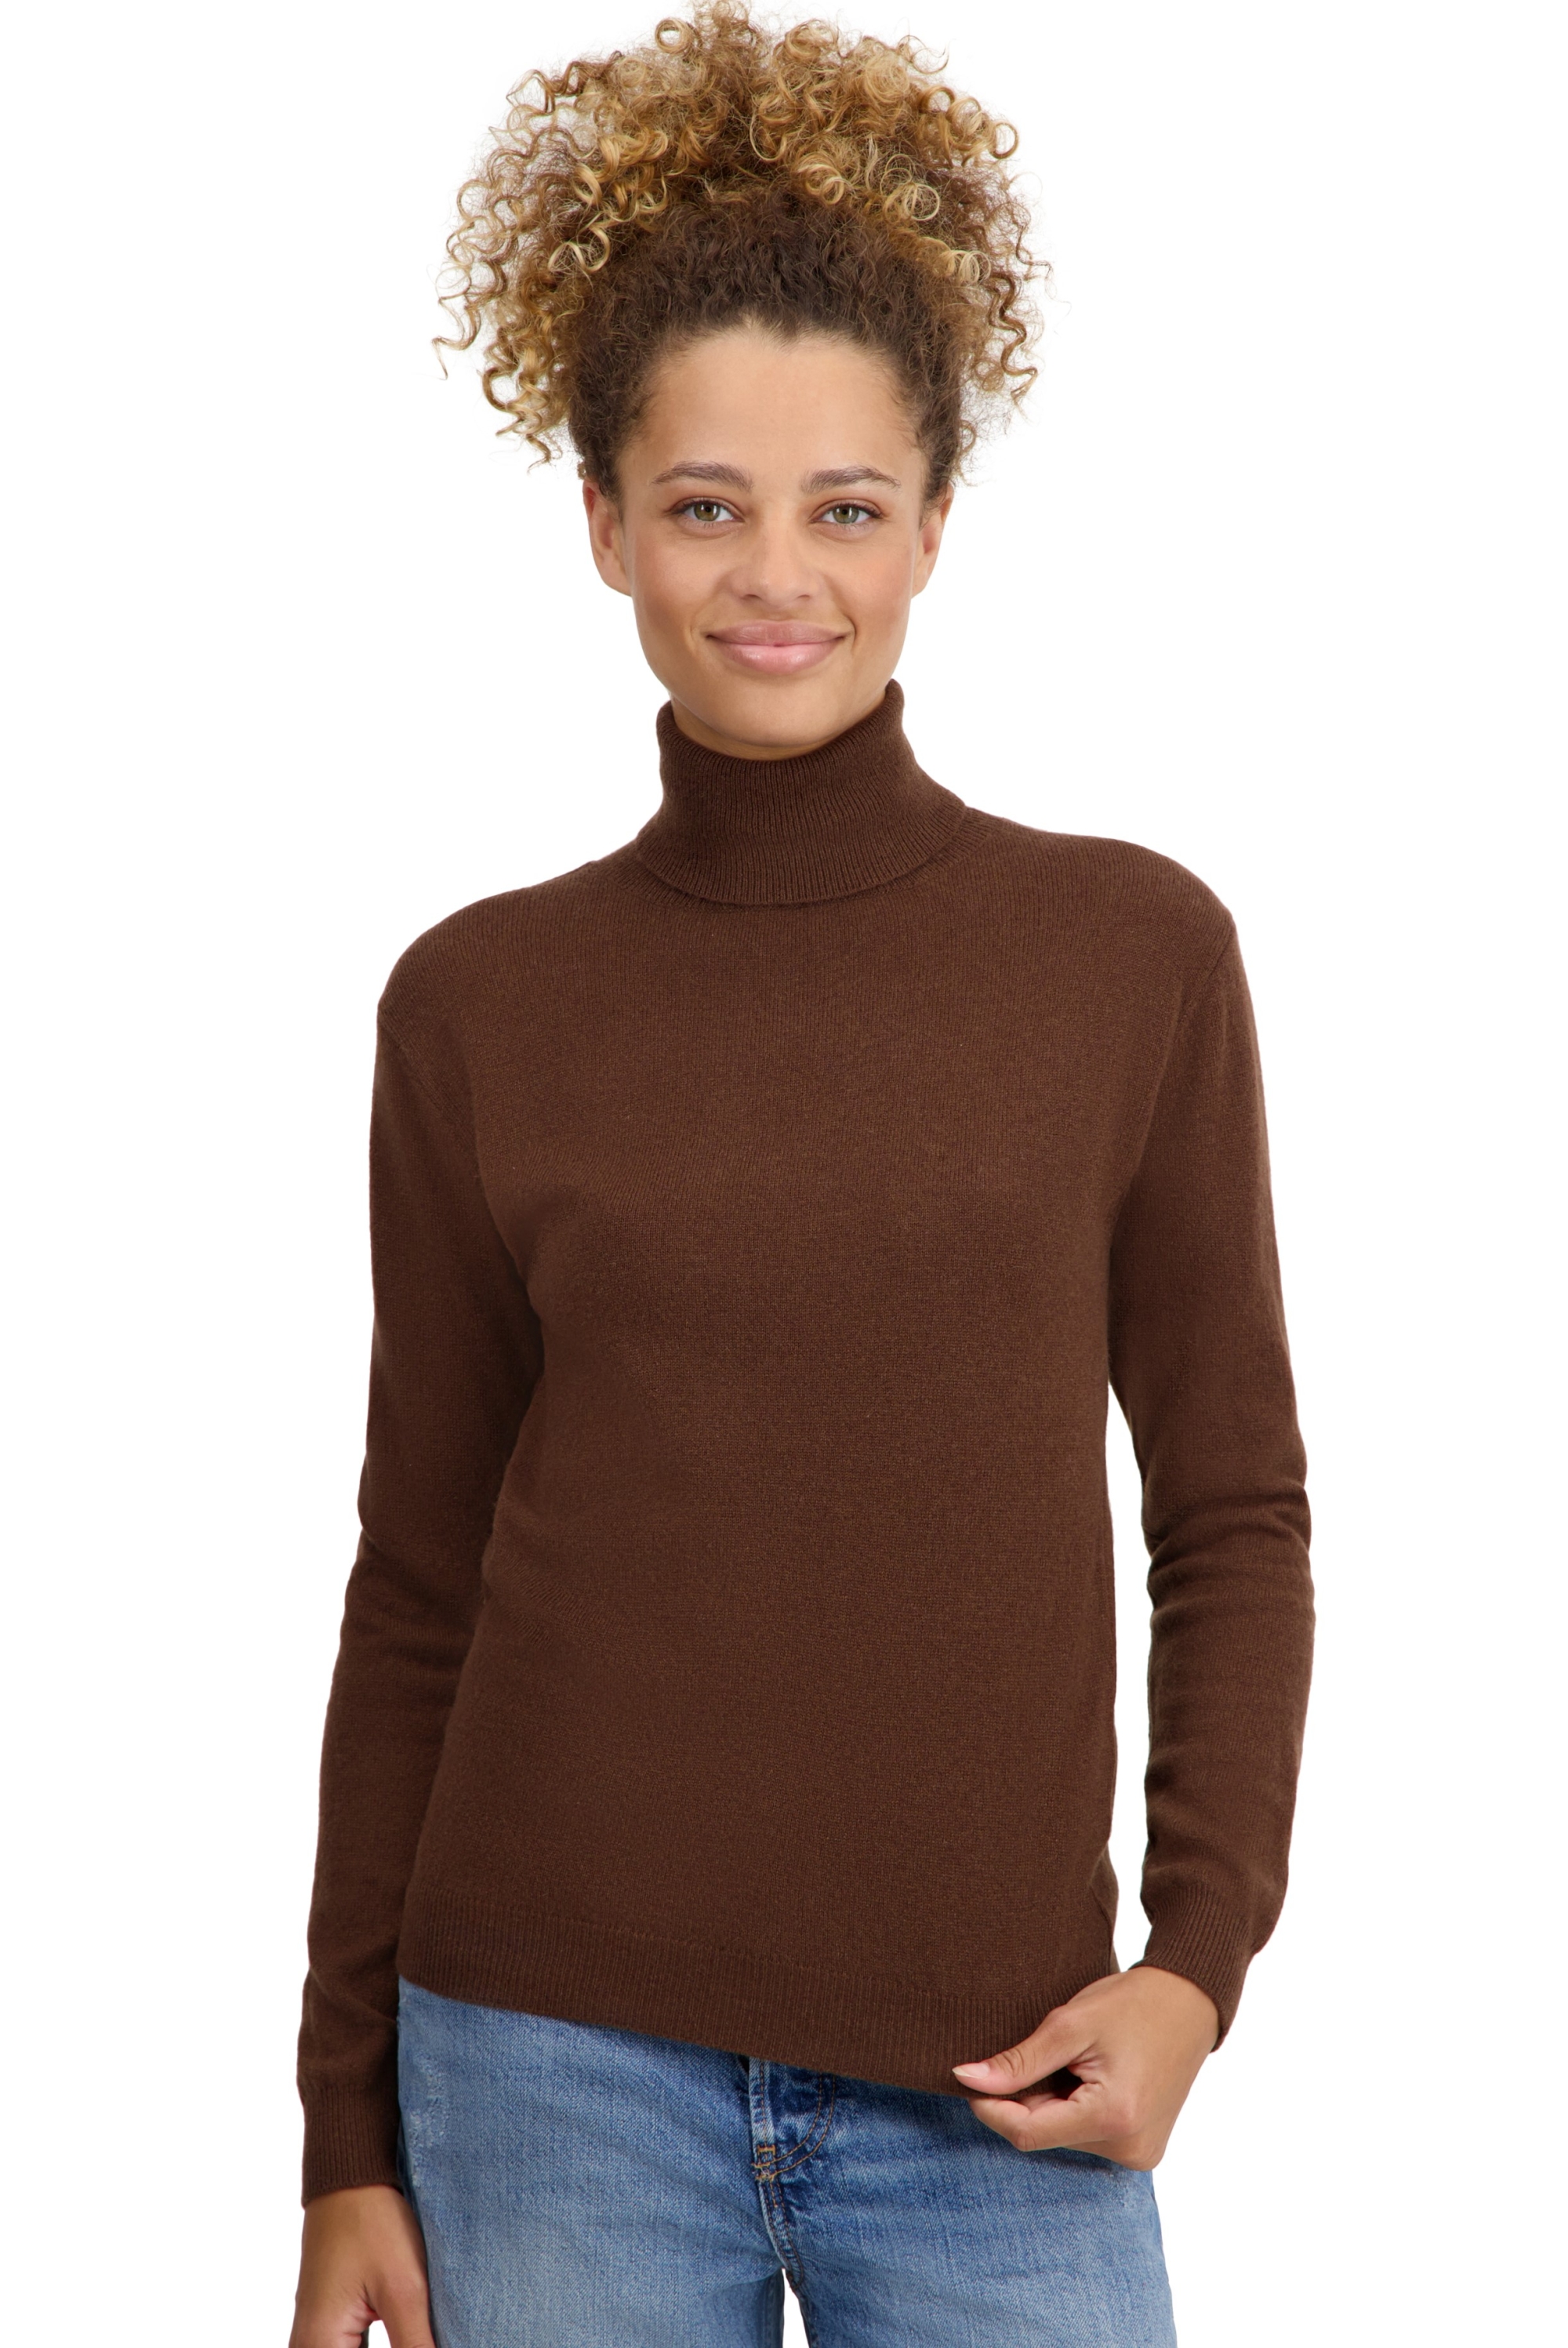 Cashmere ladies basic sweaters at low prices tale first dark camel xl